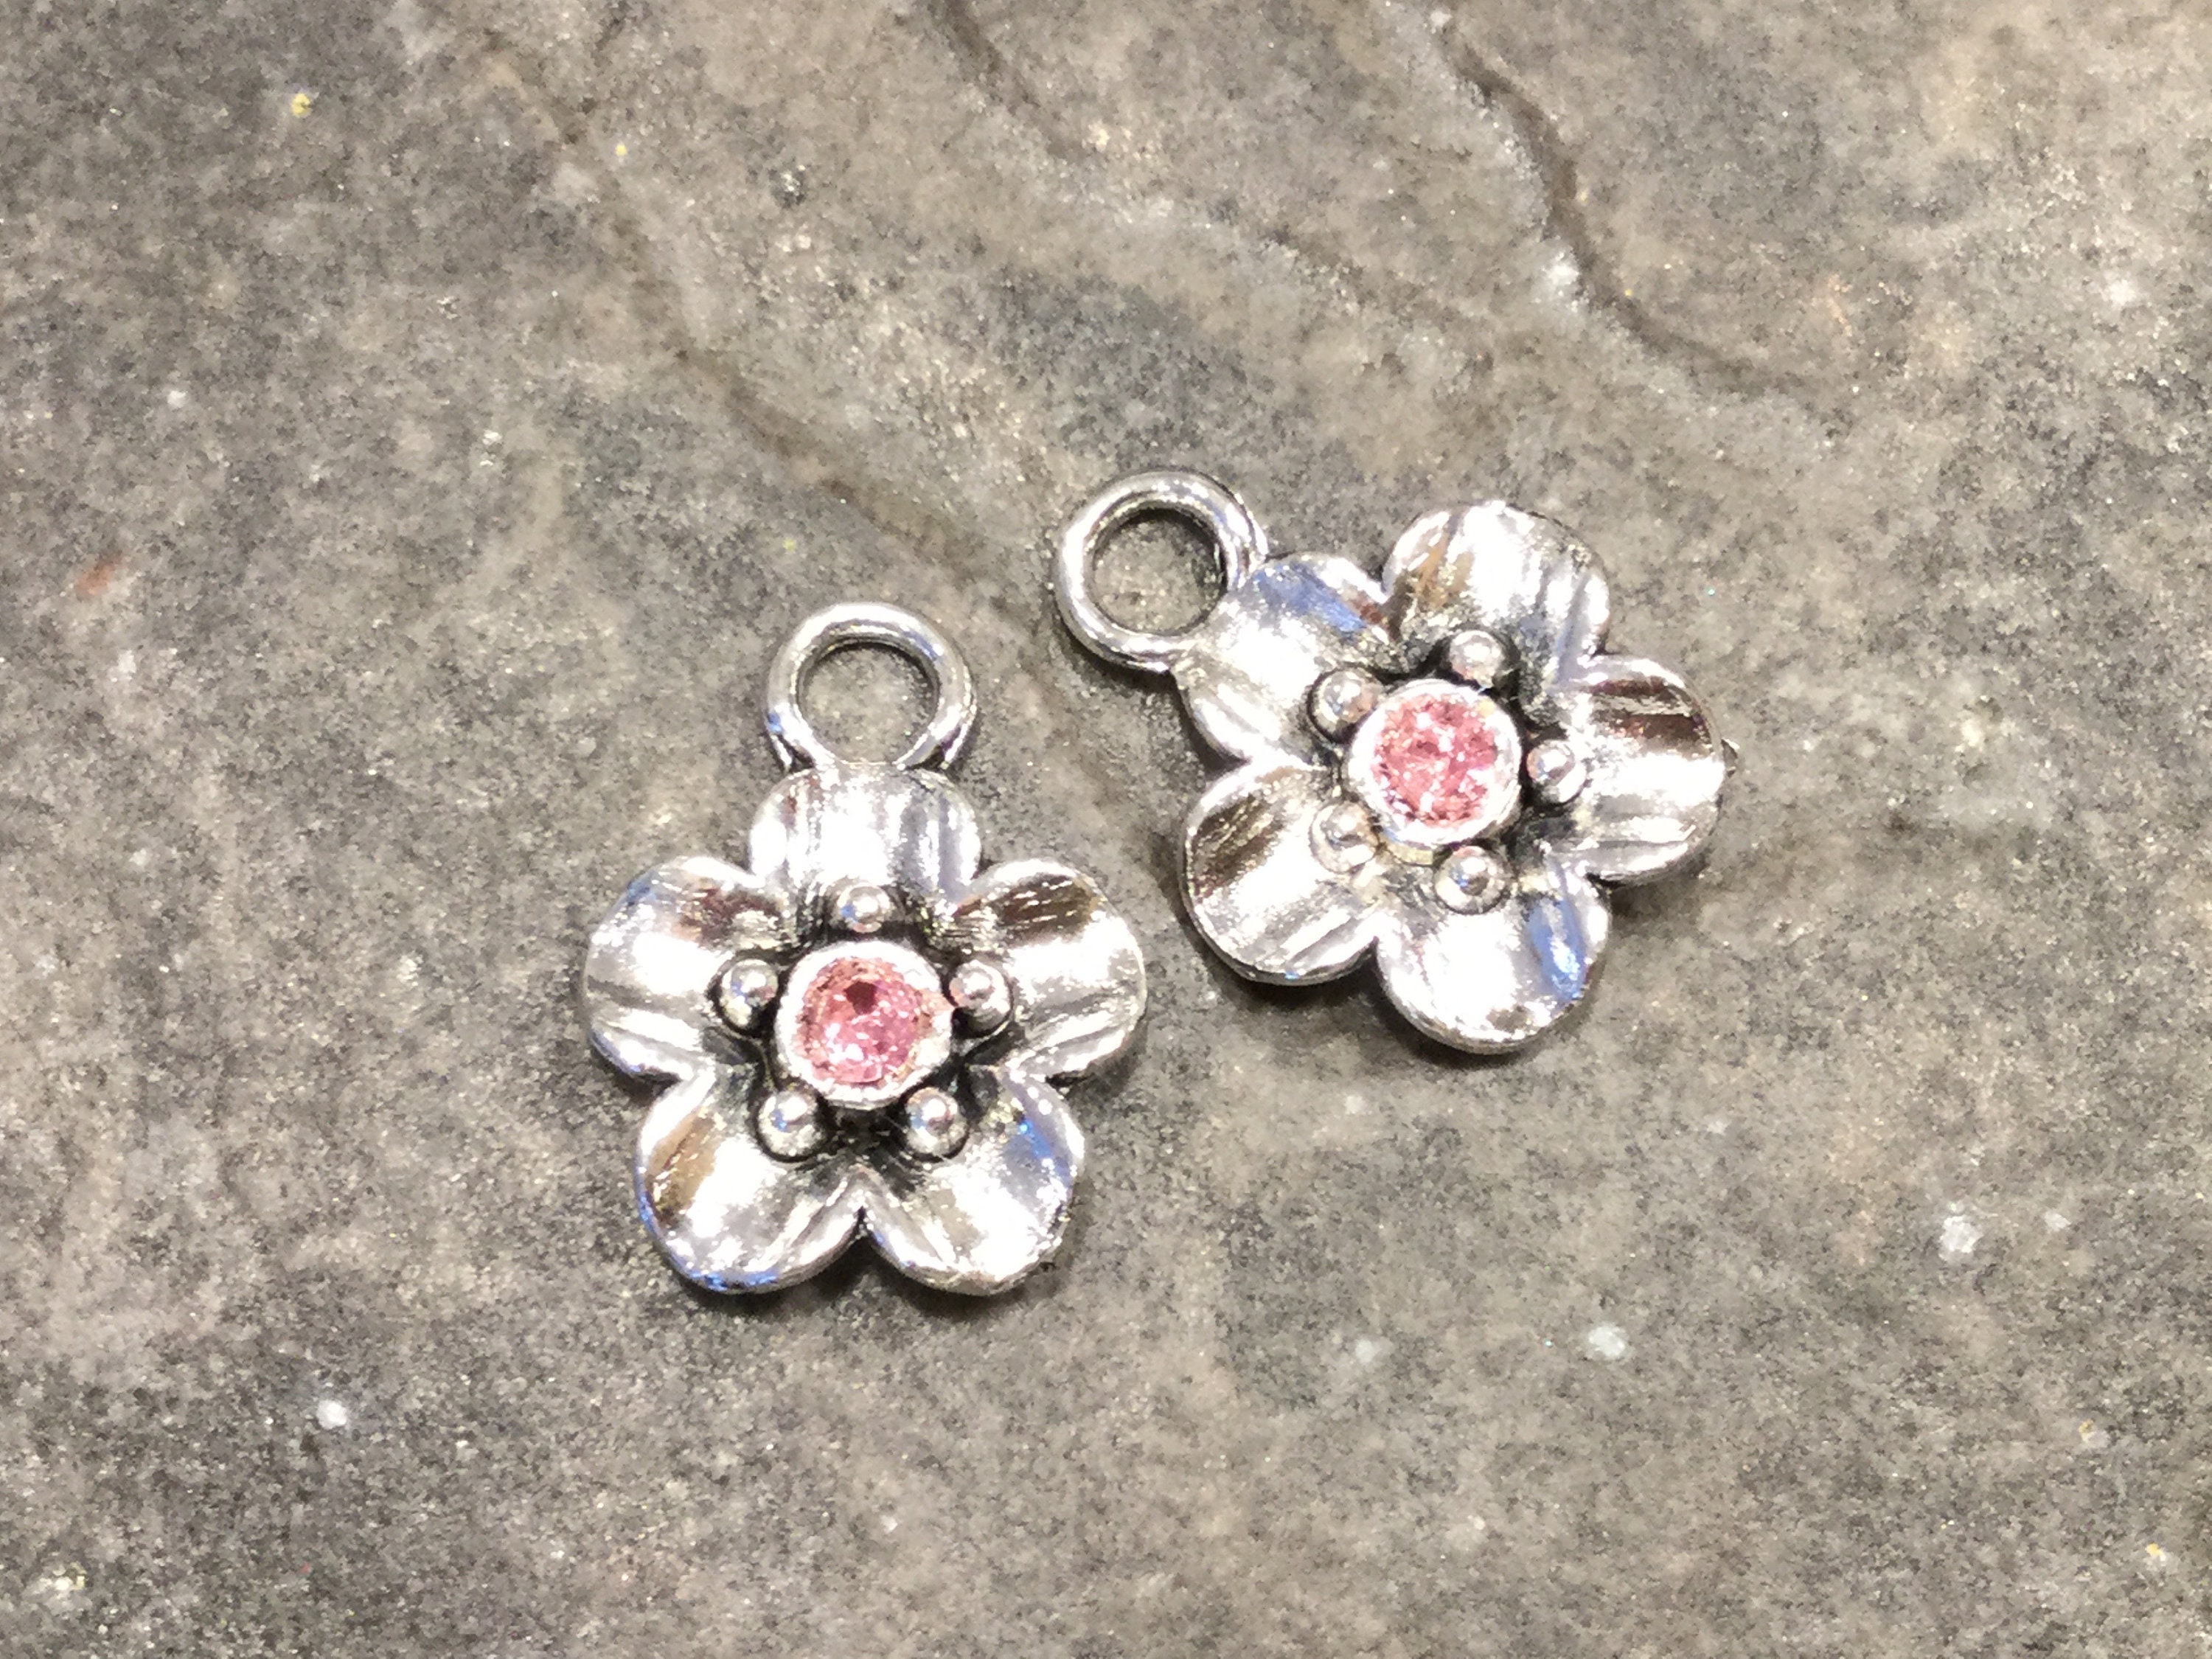 Flower Charms 